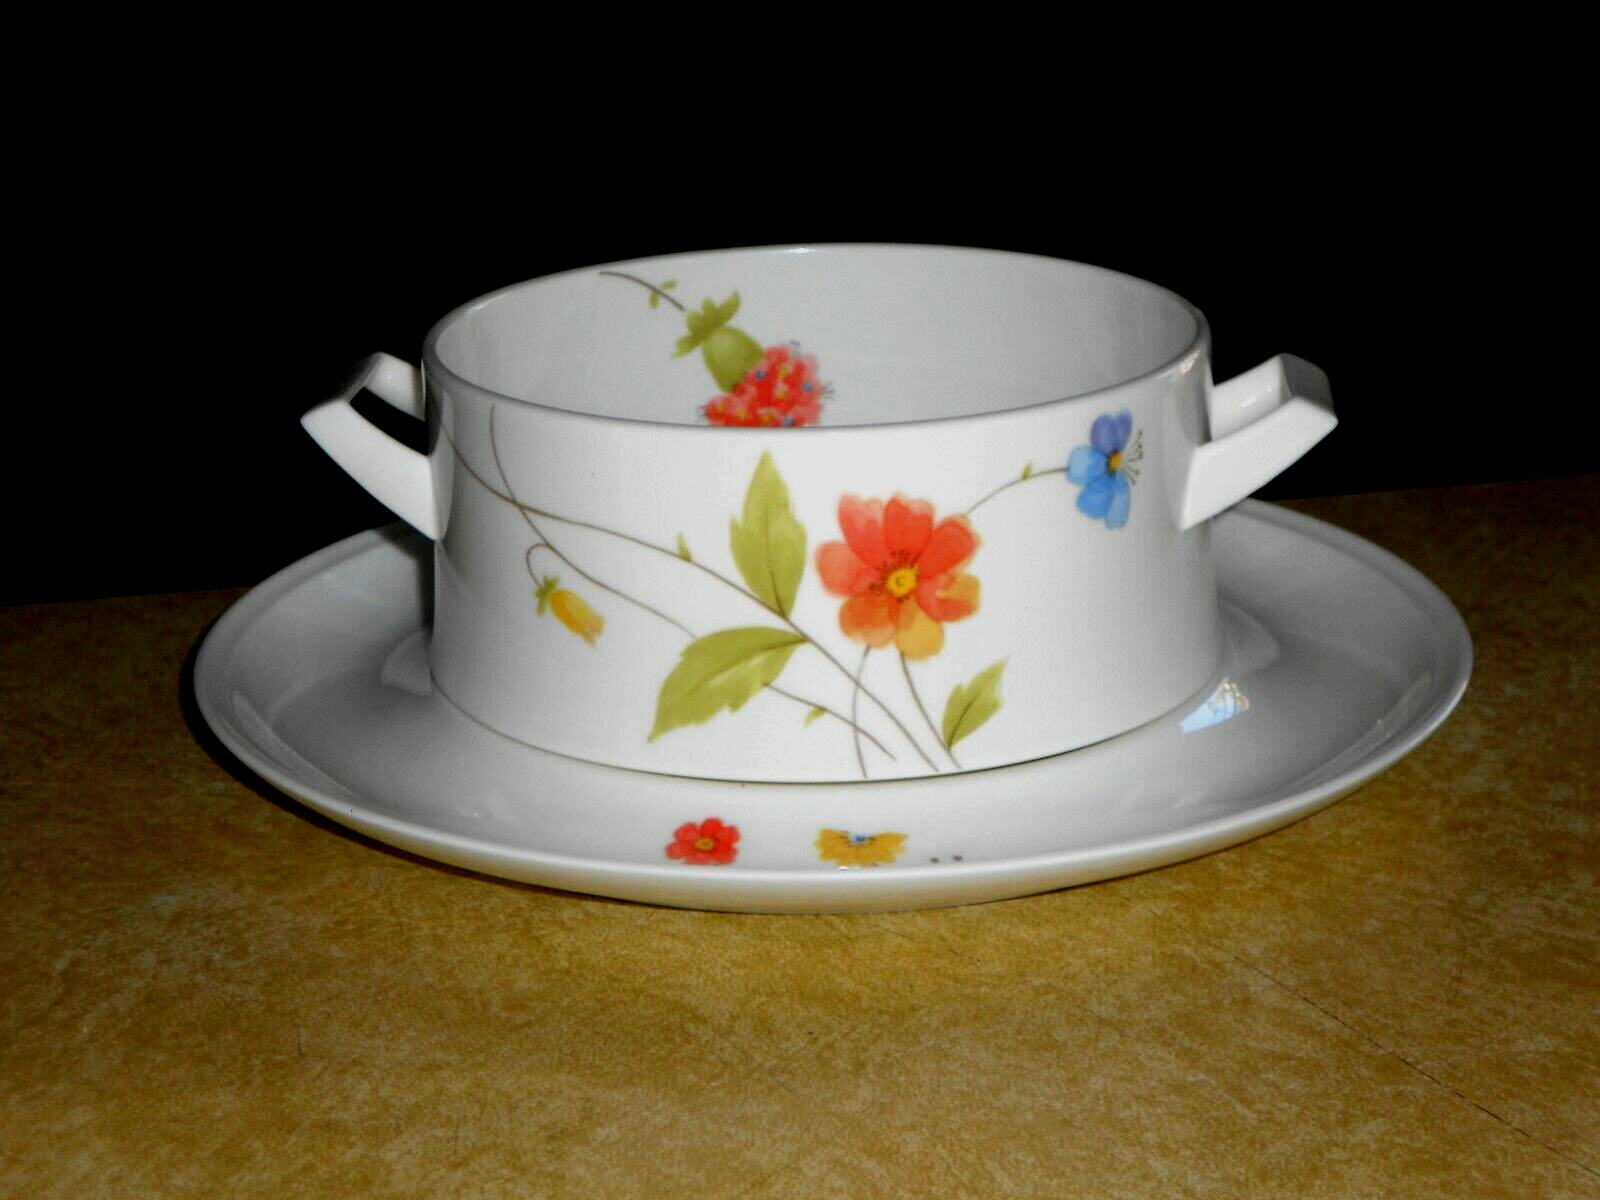 Mikasa Just Flowers Gravy Boat and Underplate A4182 2-pc Set - $41.58